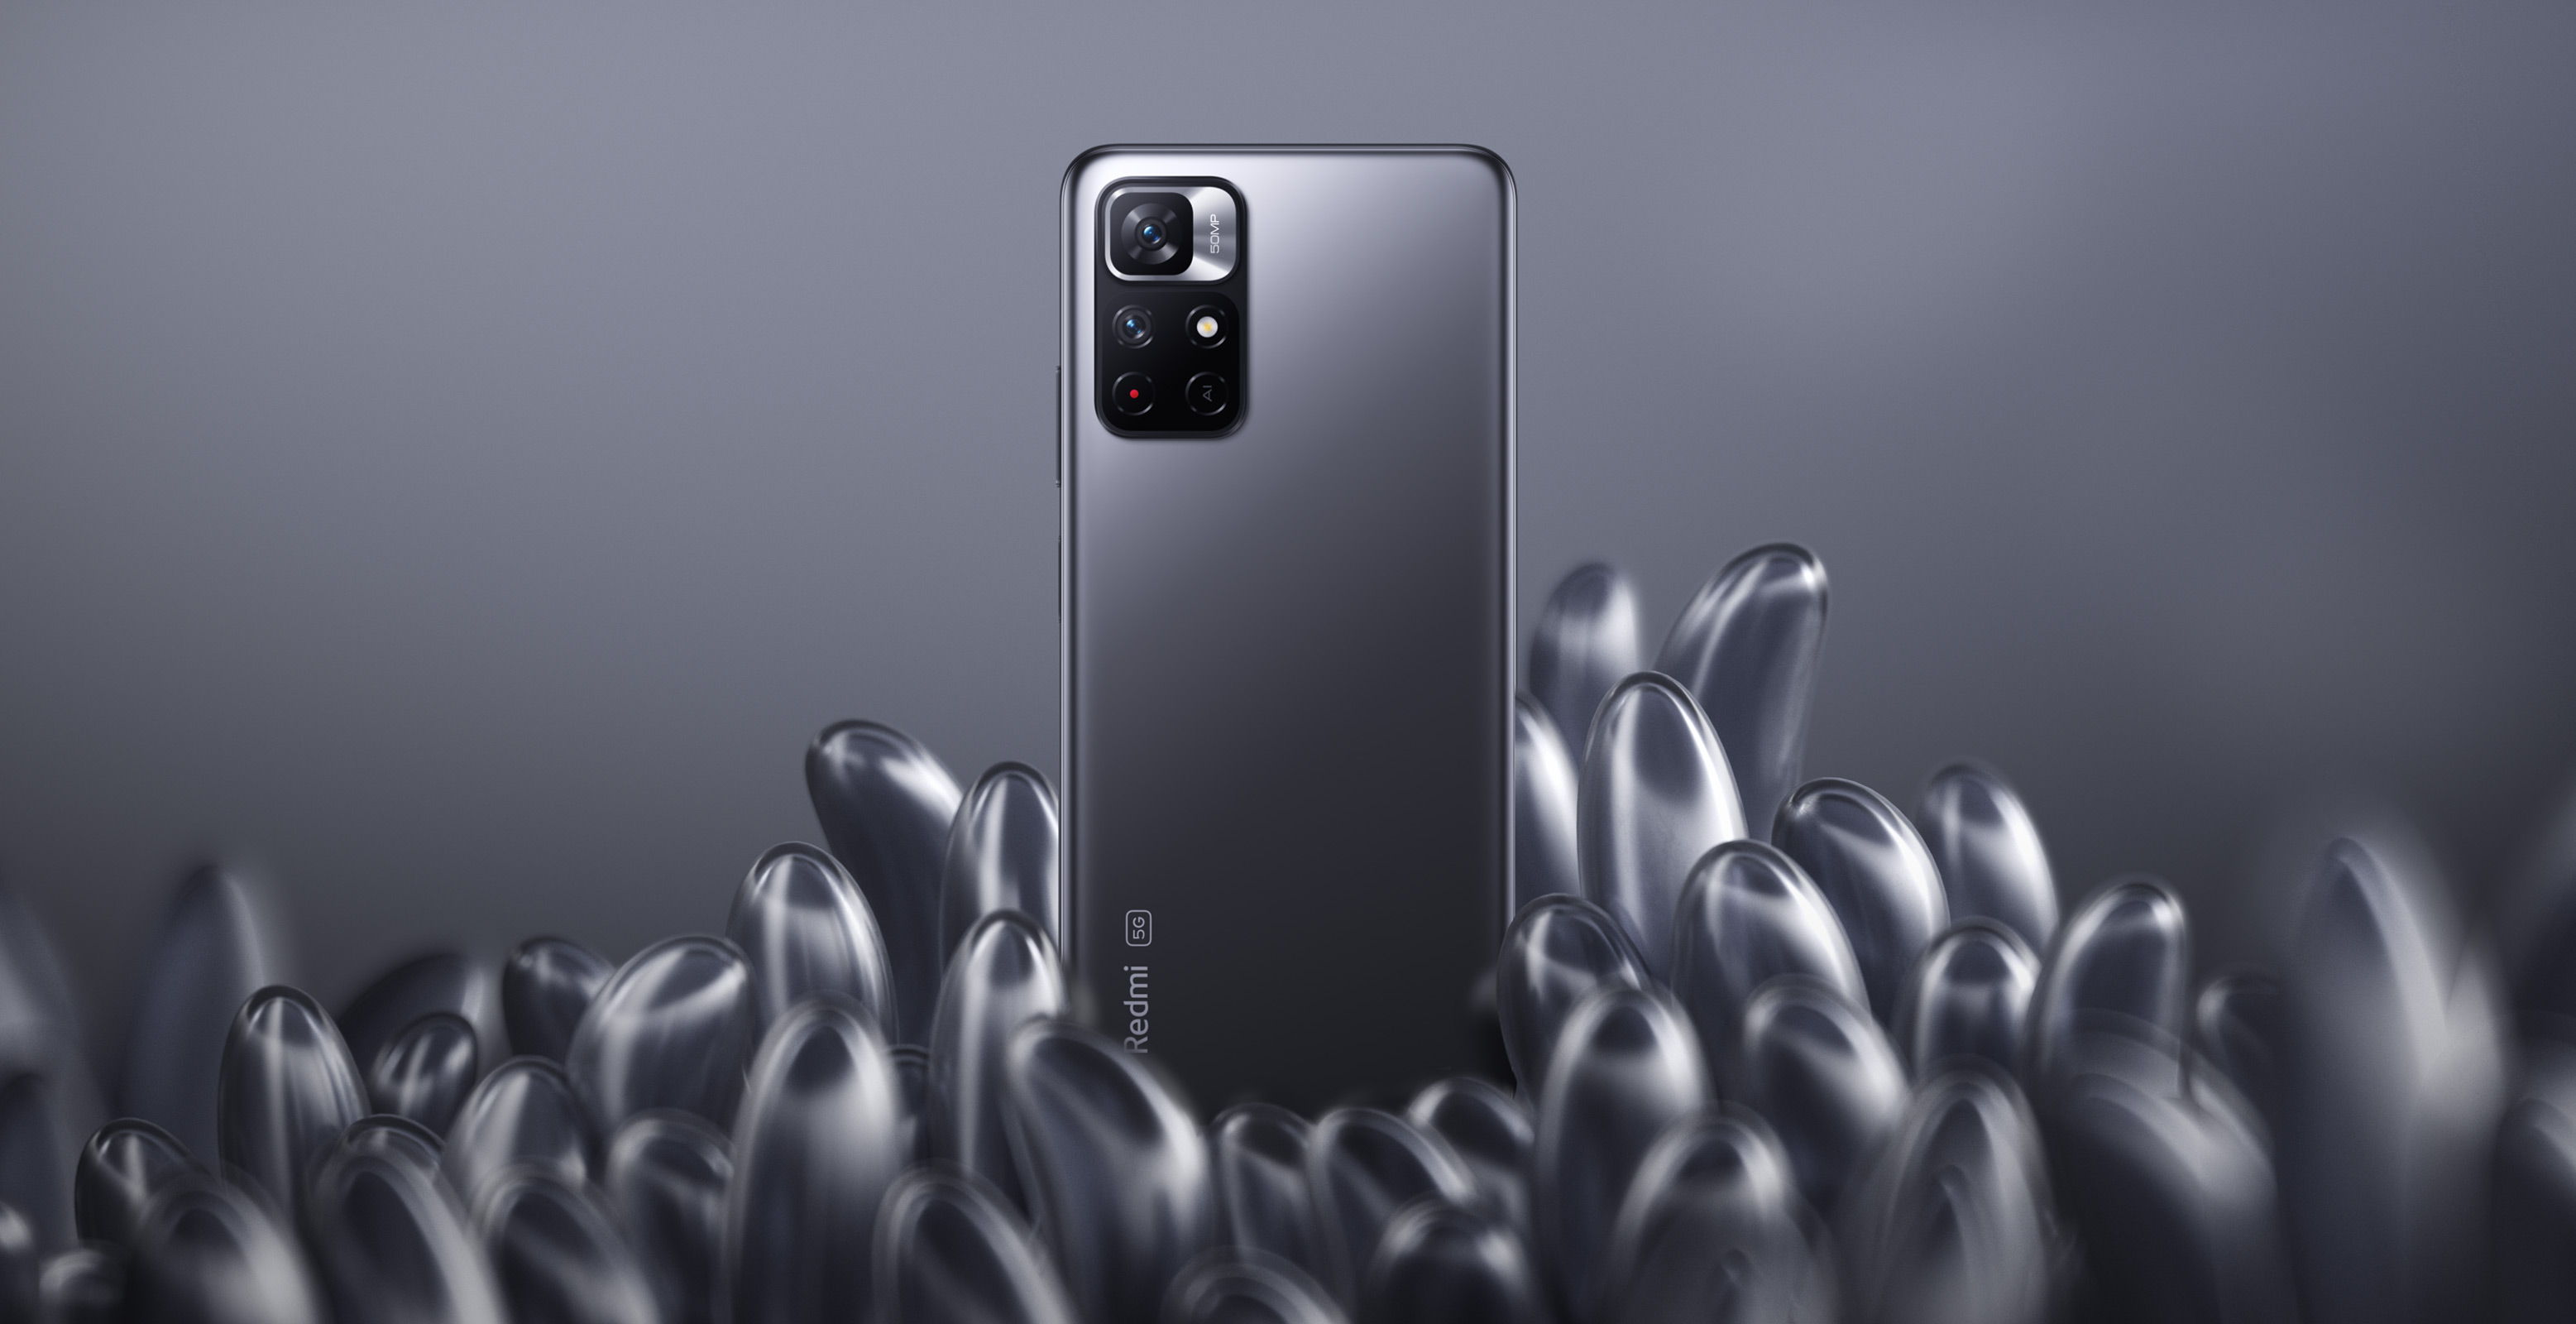 Snapdragon 480+, IP68 protection, 50MP camera and MIUI 13 out of the box - Redmi Note 11 JE specs revealed